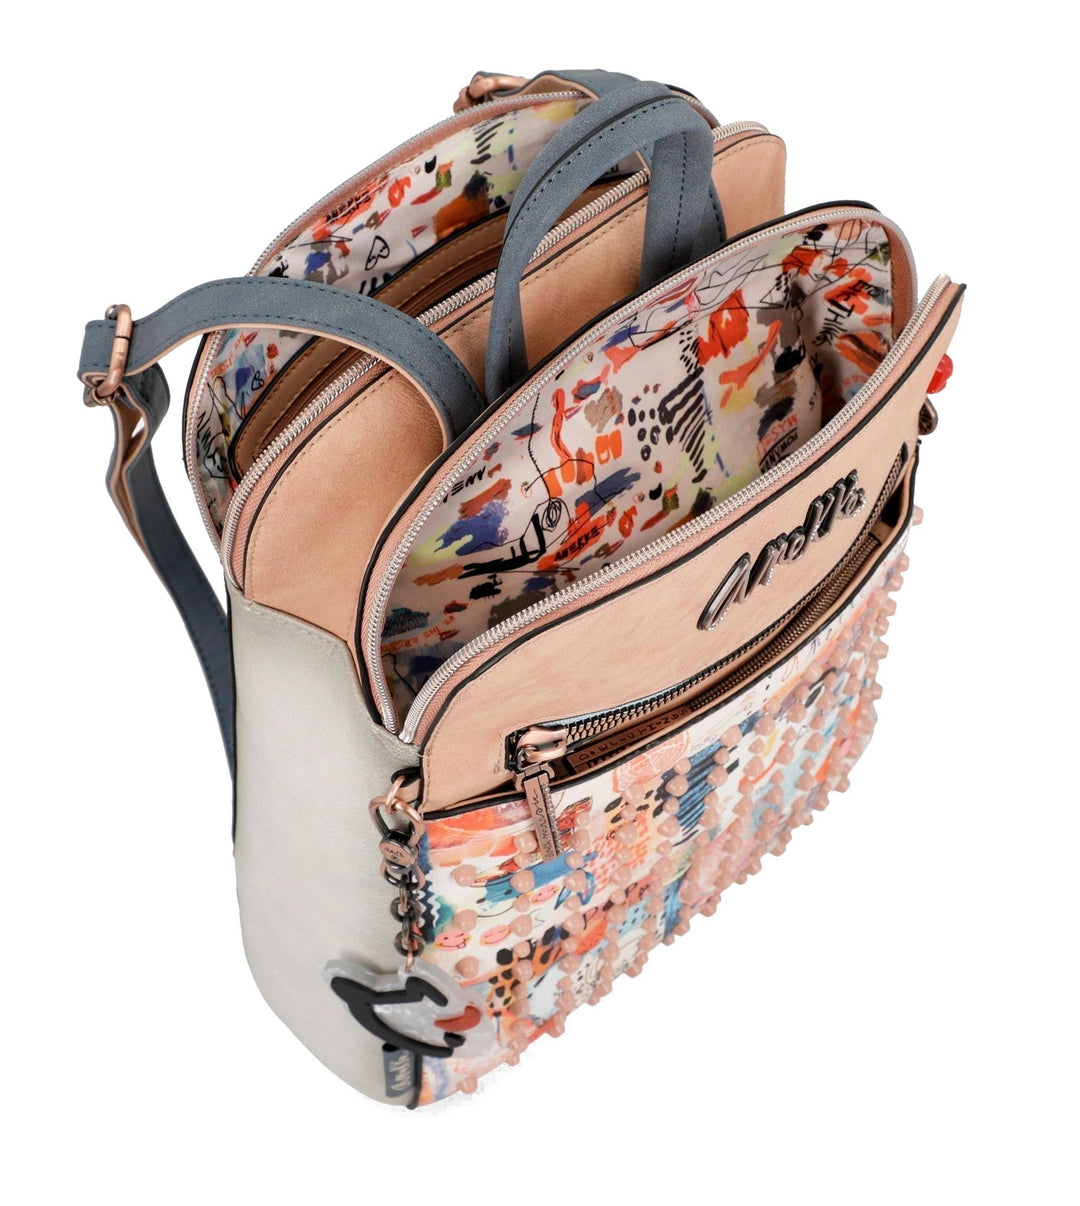 Anekke Fun & Music Double Compartment Backpack